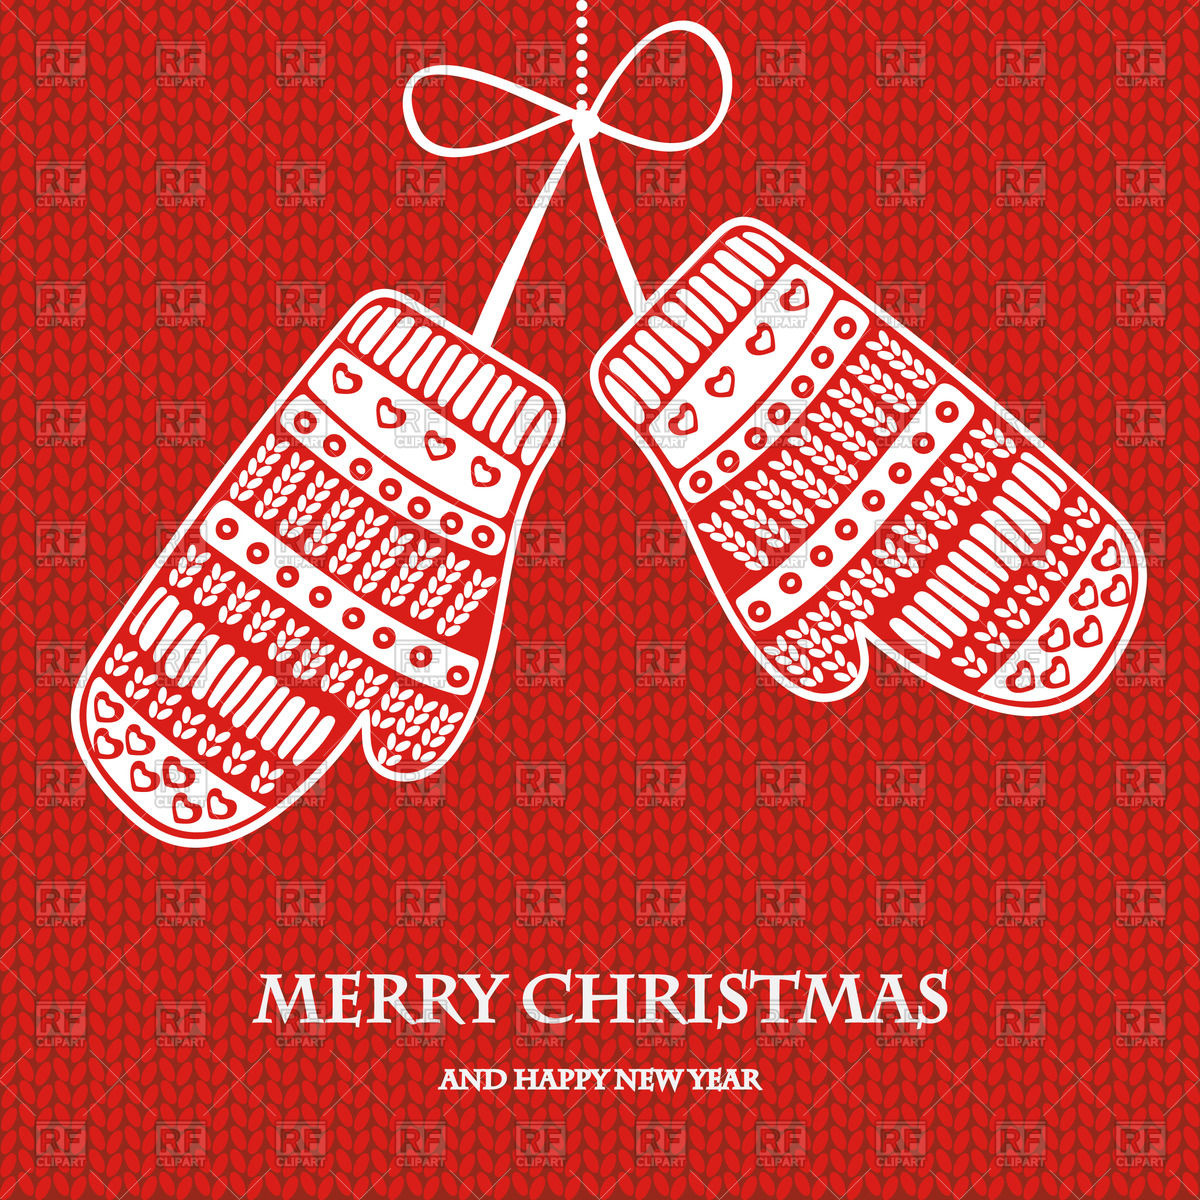 Christmas Card Wiht Mittens On Red Knitted Background Backgrounds